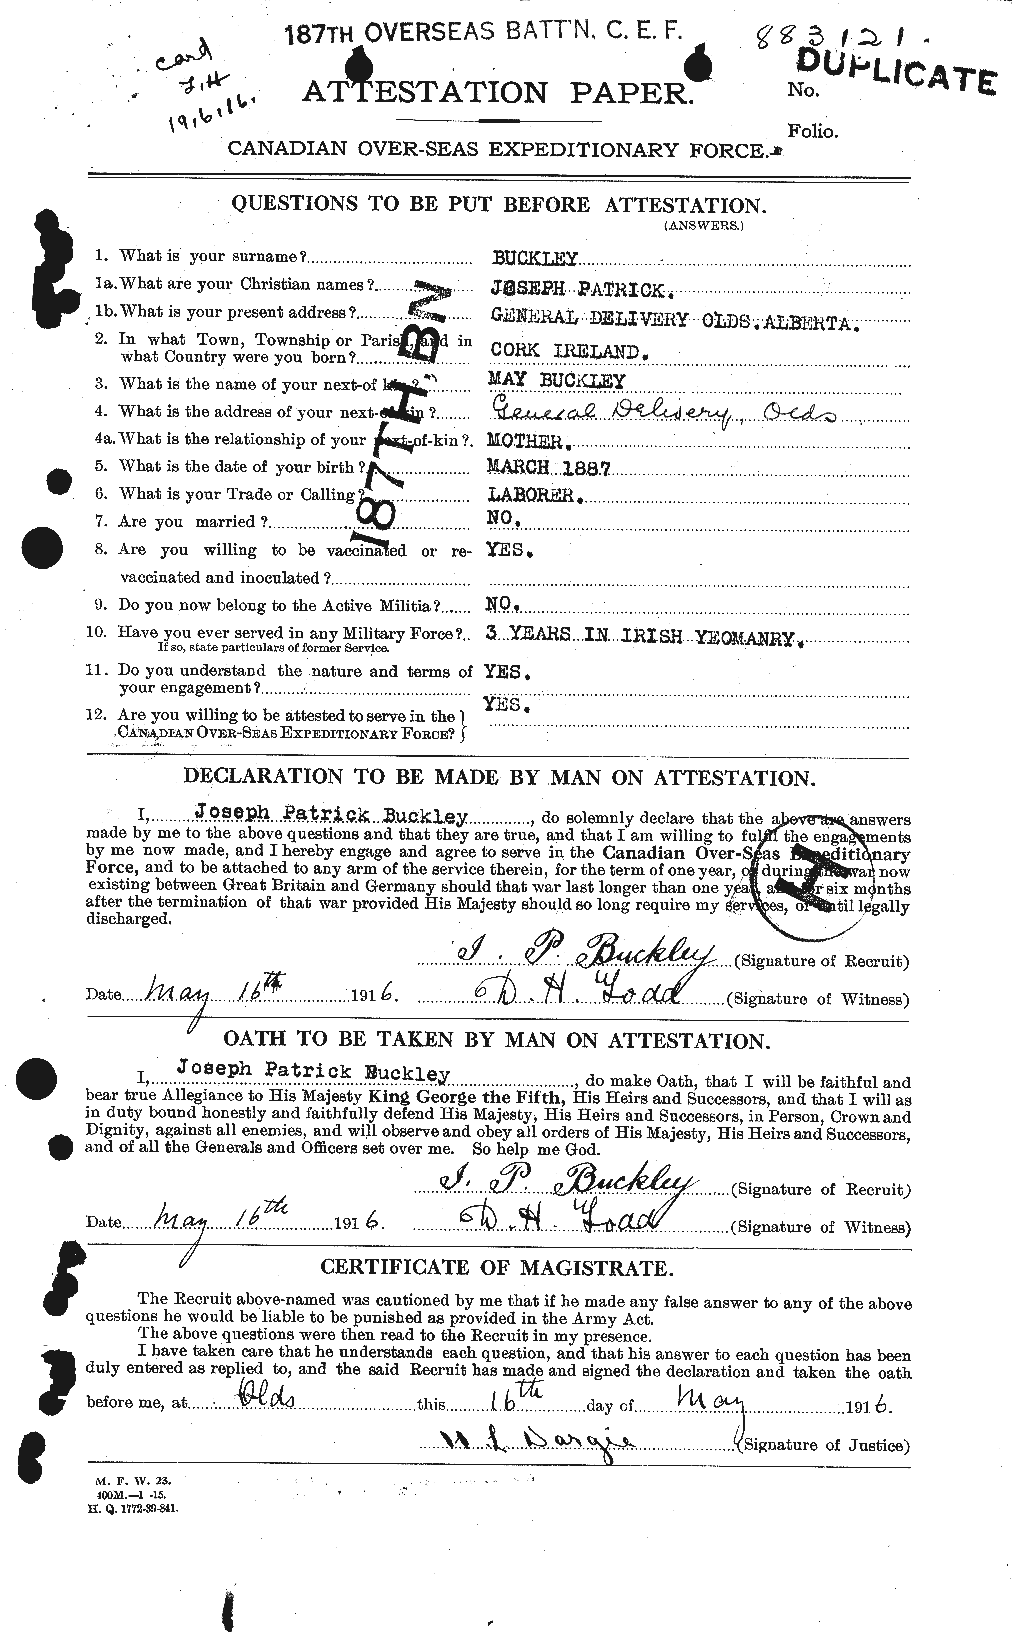 Personnel Records of the First World War - CEF 271154a